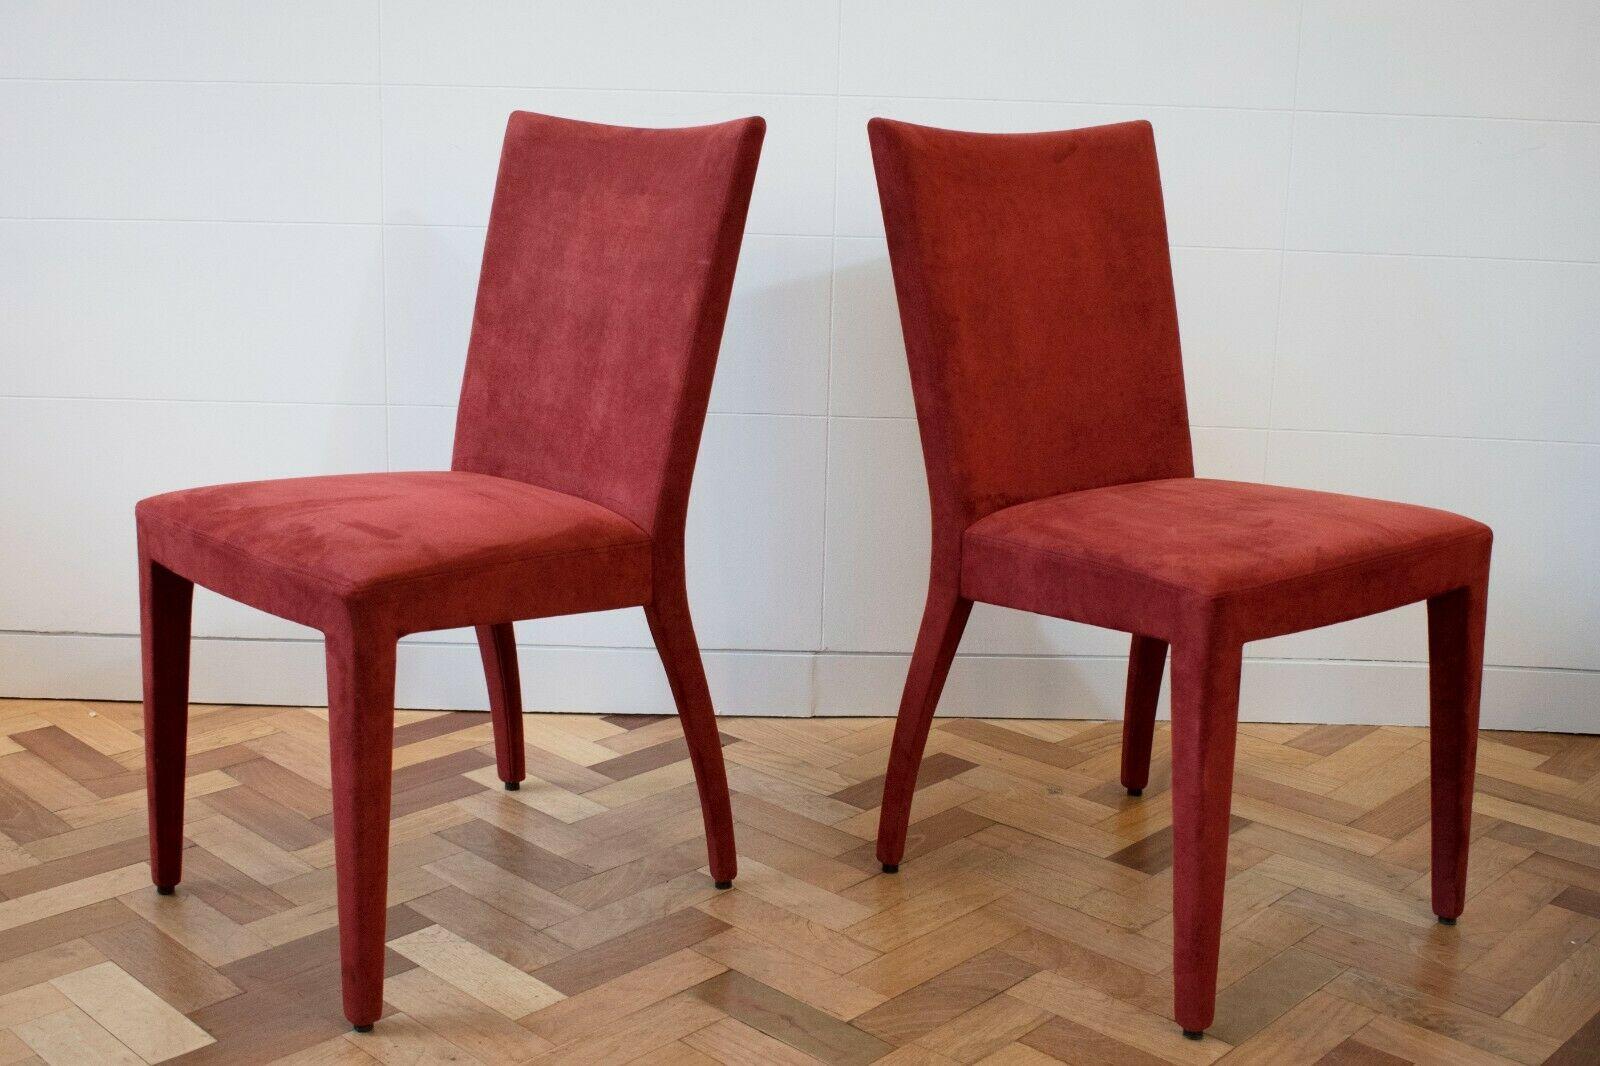 Contemporary Roche Bobois Red Suede Dining Chairs, Set of 6 